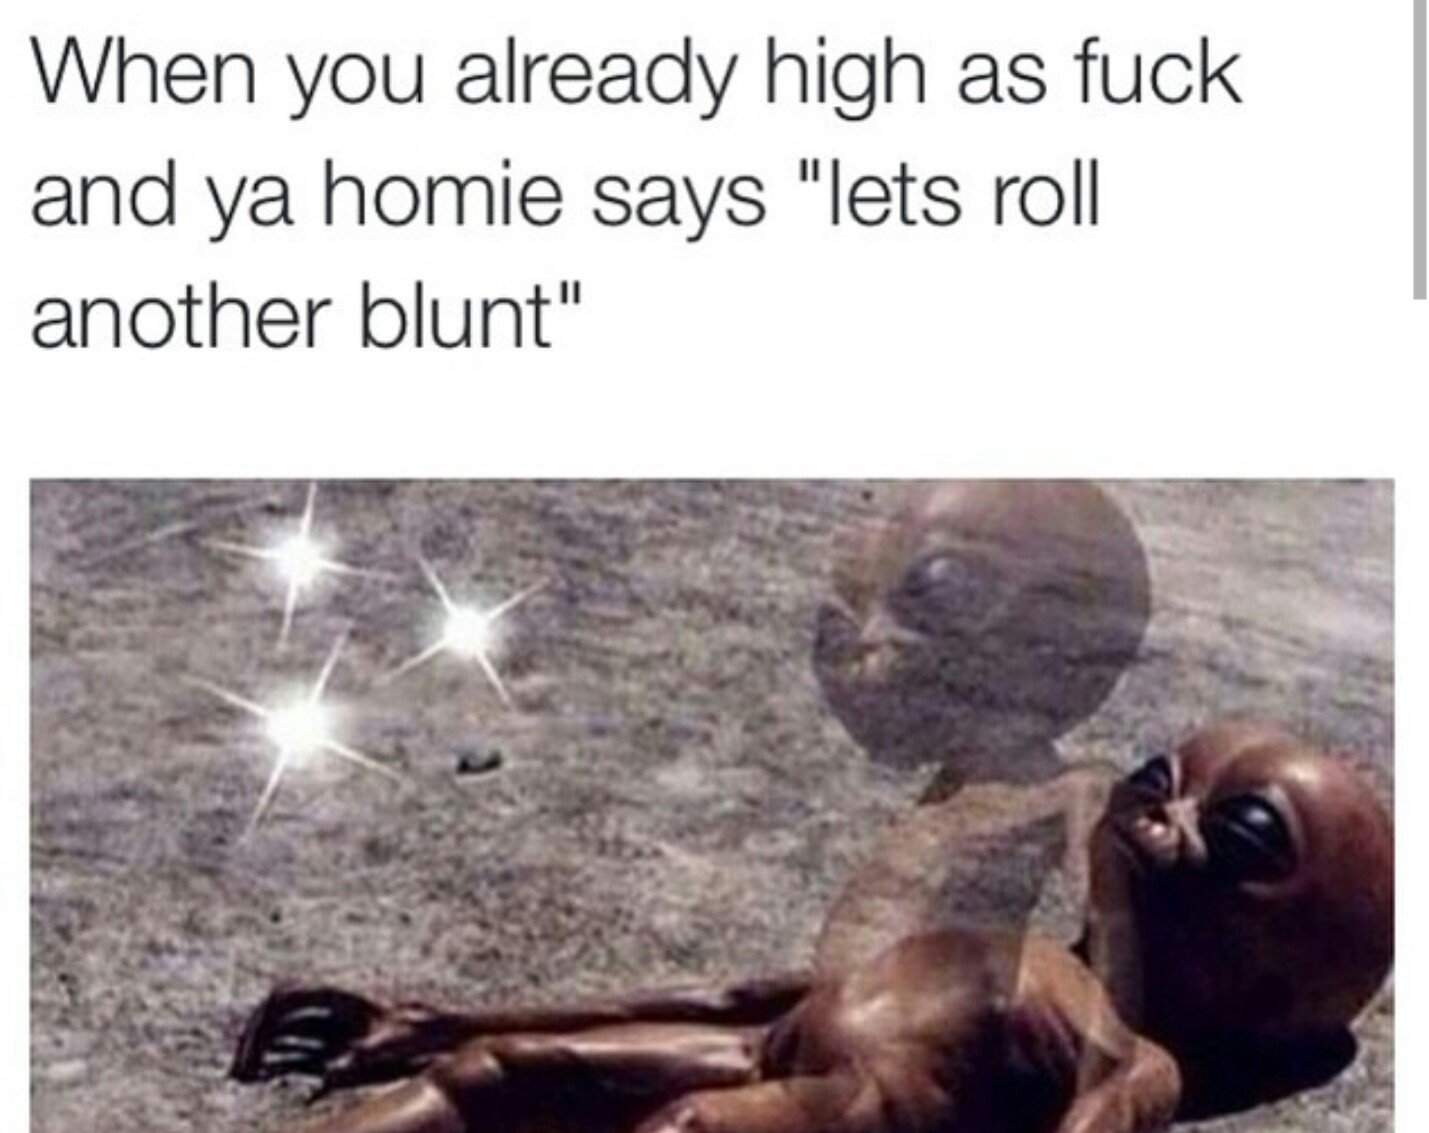 tumblr - ignition remix meme - When you already high as fuck and ya homie says "lets roll another blunt"